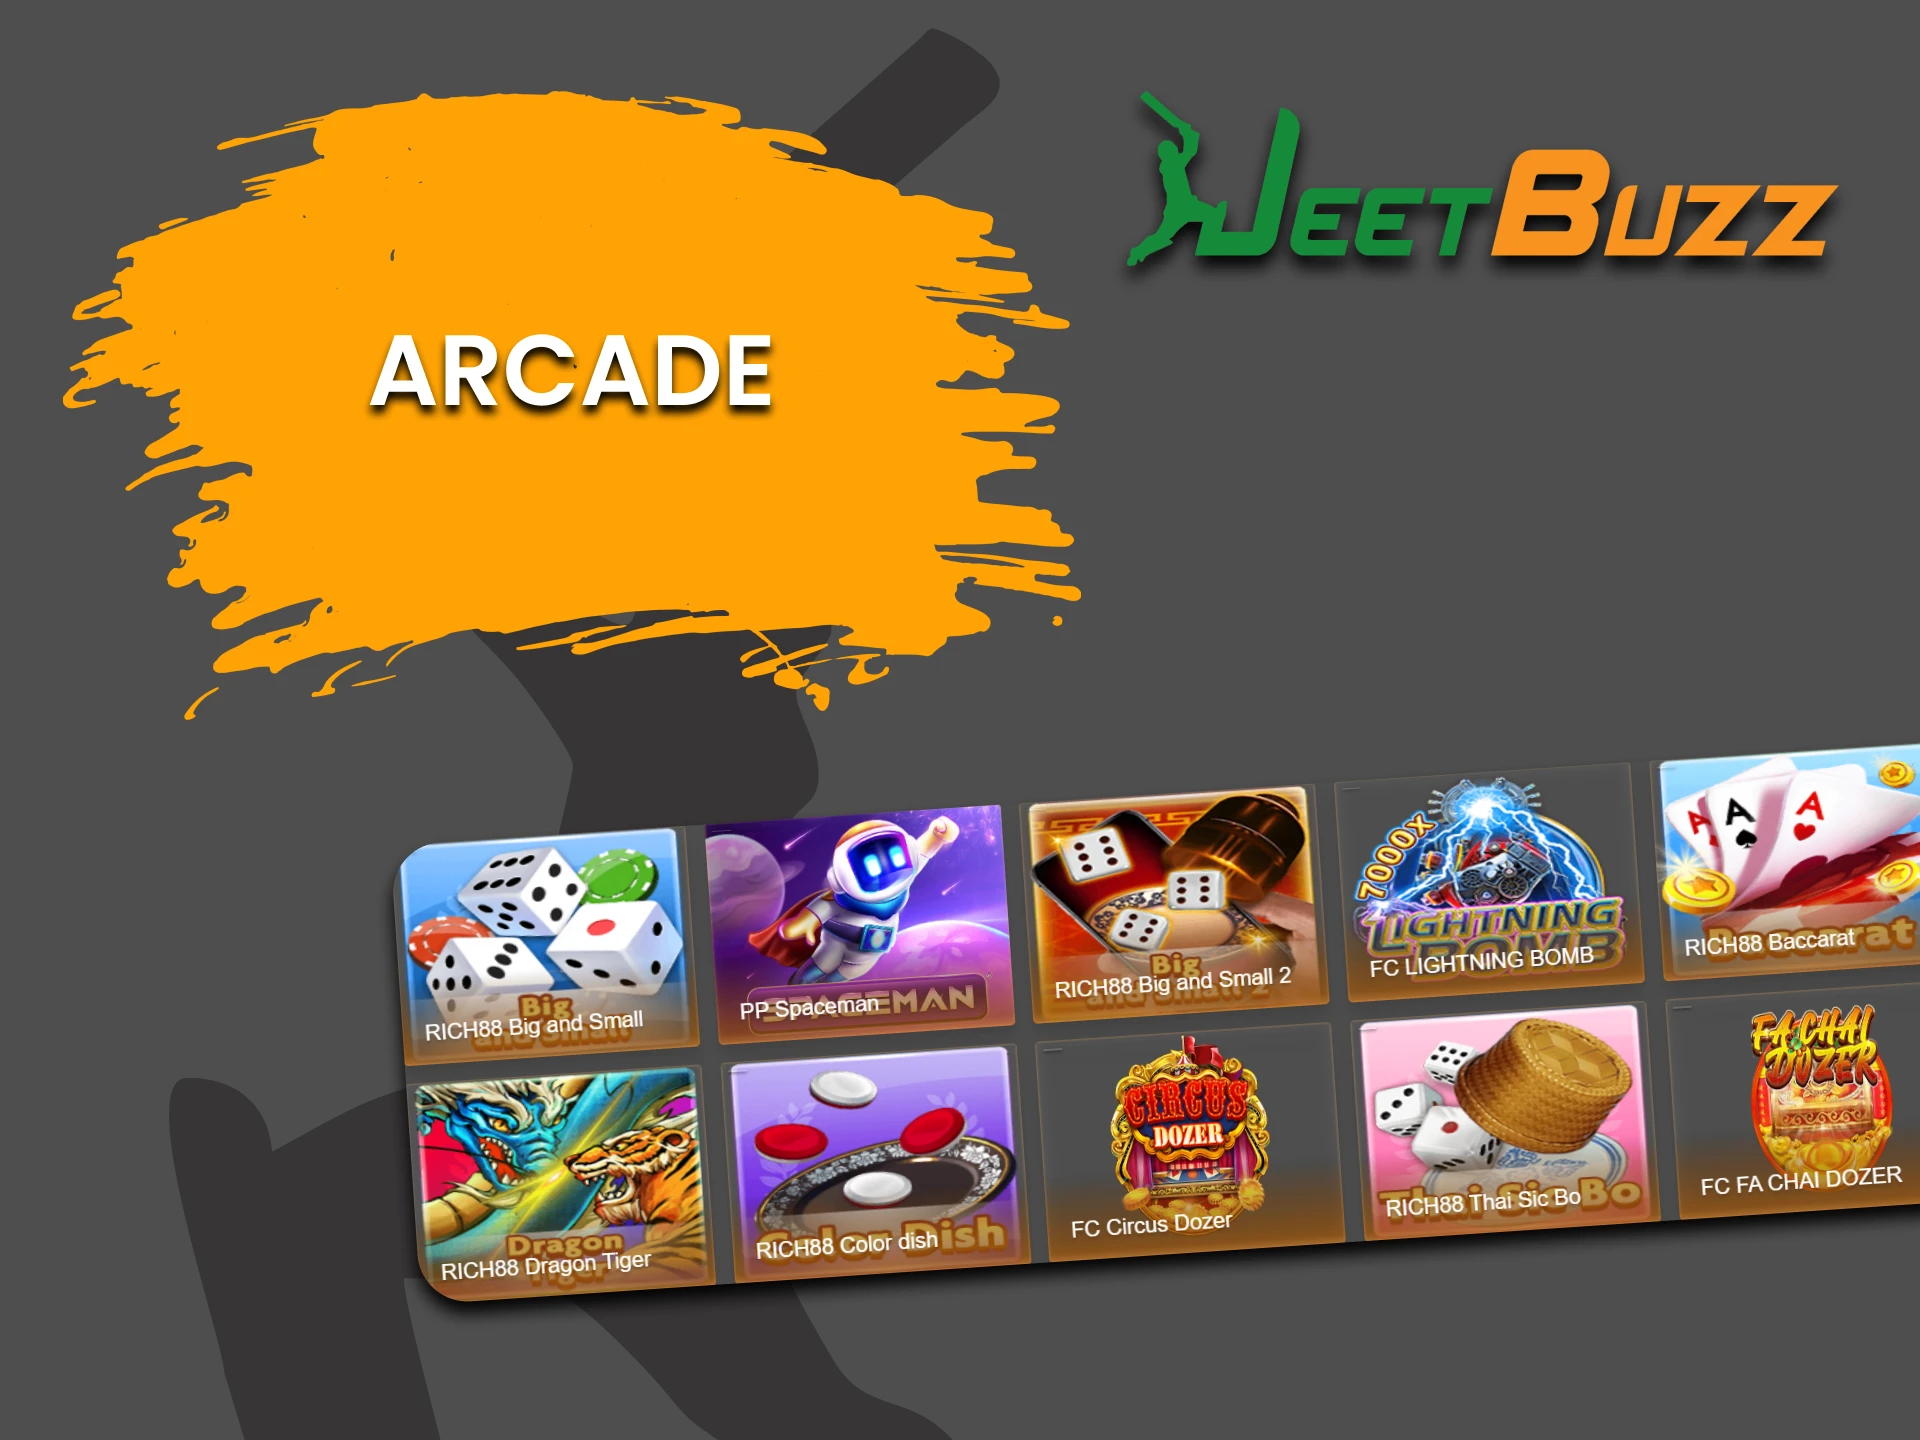 Go to the Arcade section for casino games on JeetBuzz.